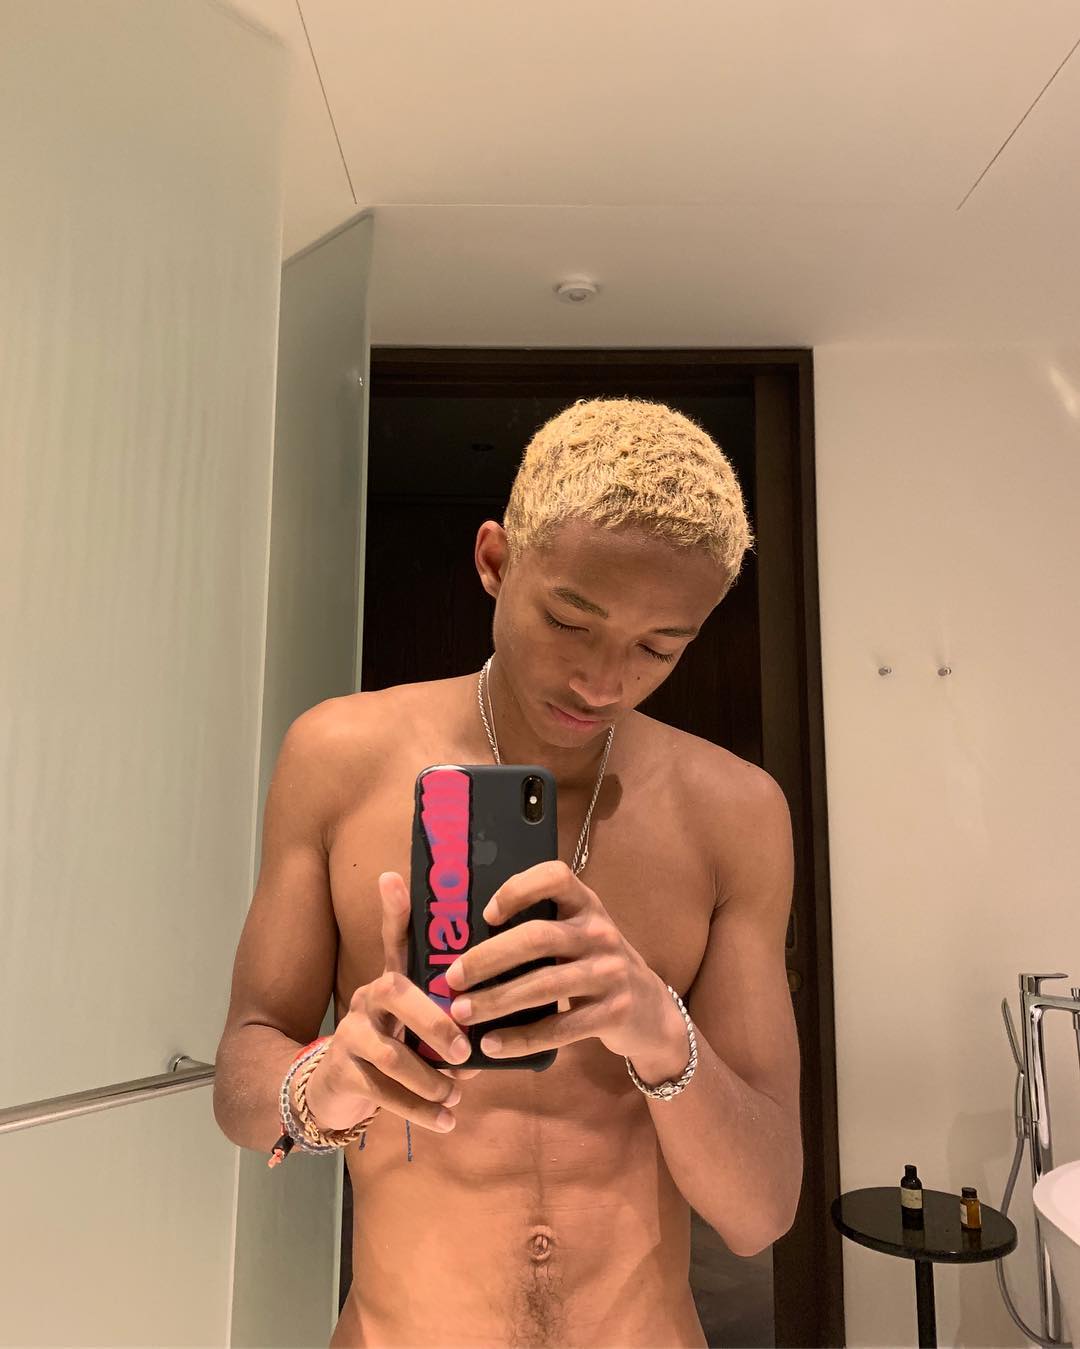 Celebrity Nudes 2022 on Twitter: "New sexy pic of Jaden Smith 🔥 Welco...